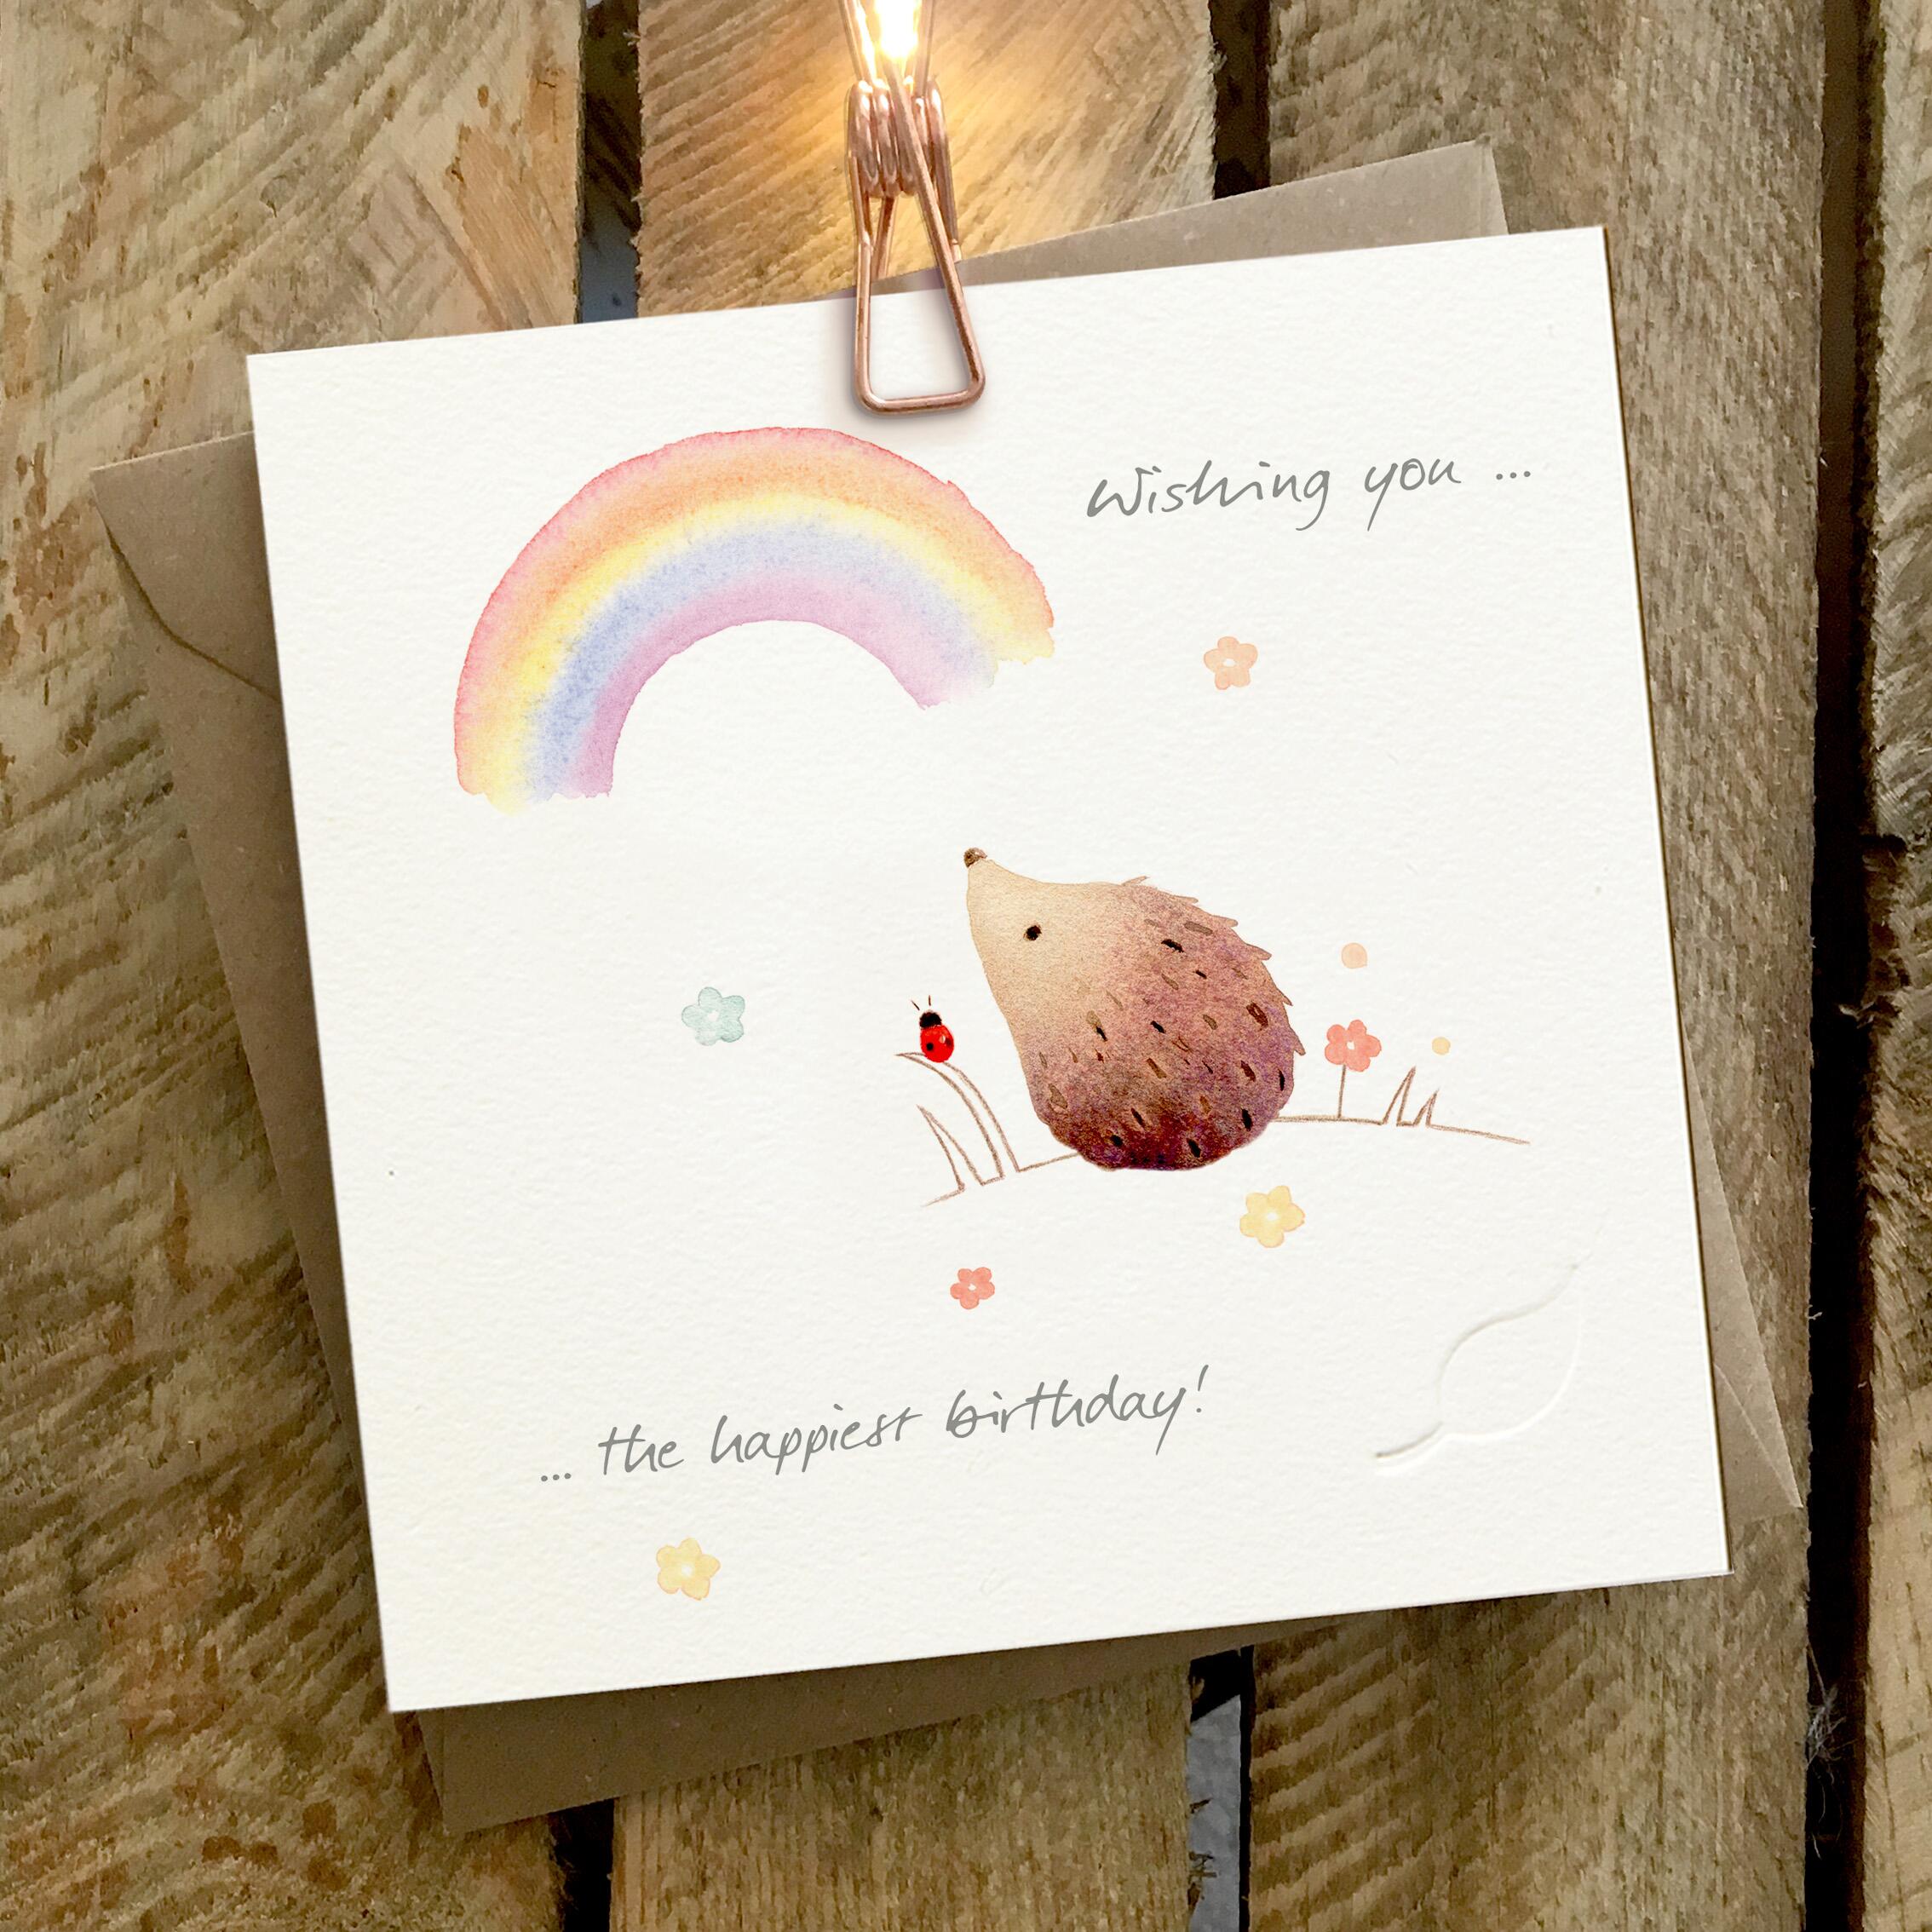 Card featuring a hedgehog and rainbow. Caption reads “Wishing You the Happiest Birthday”